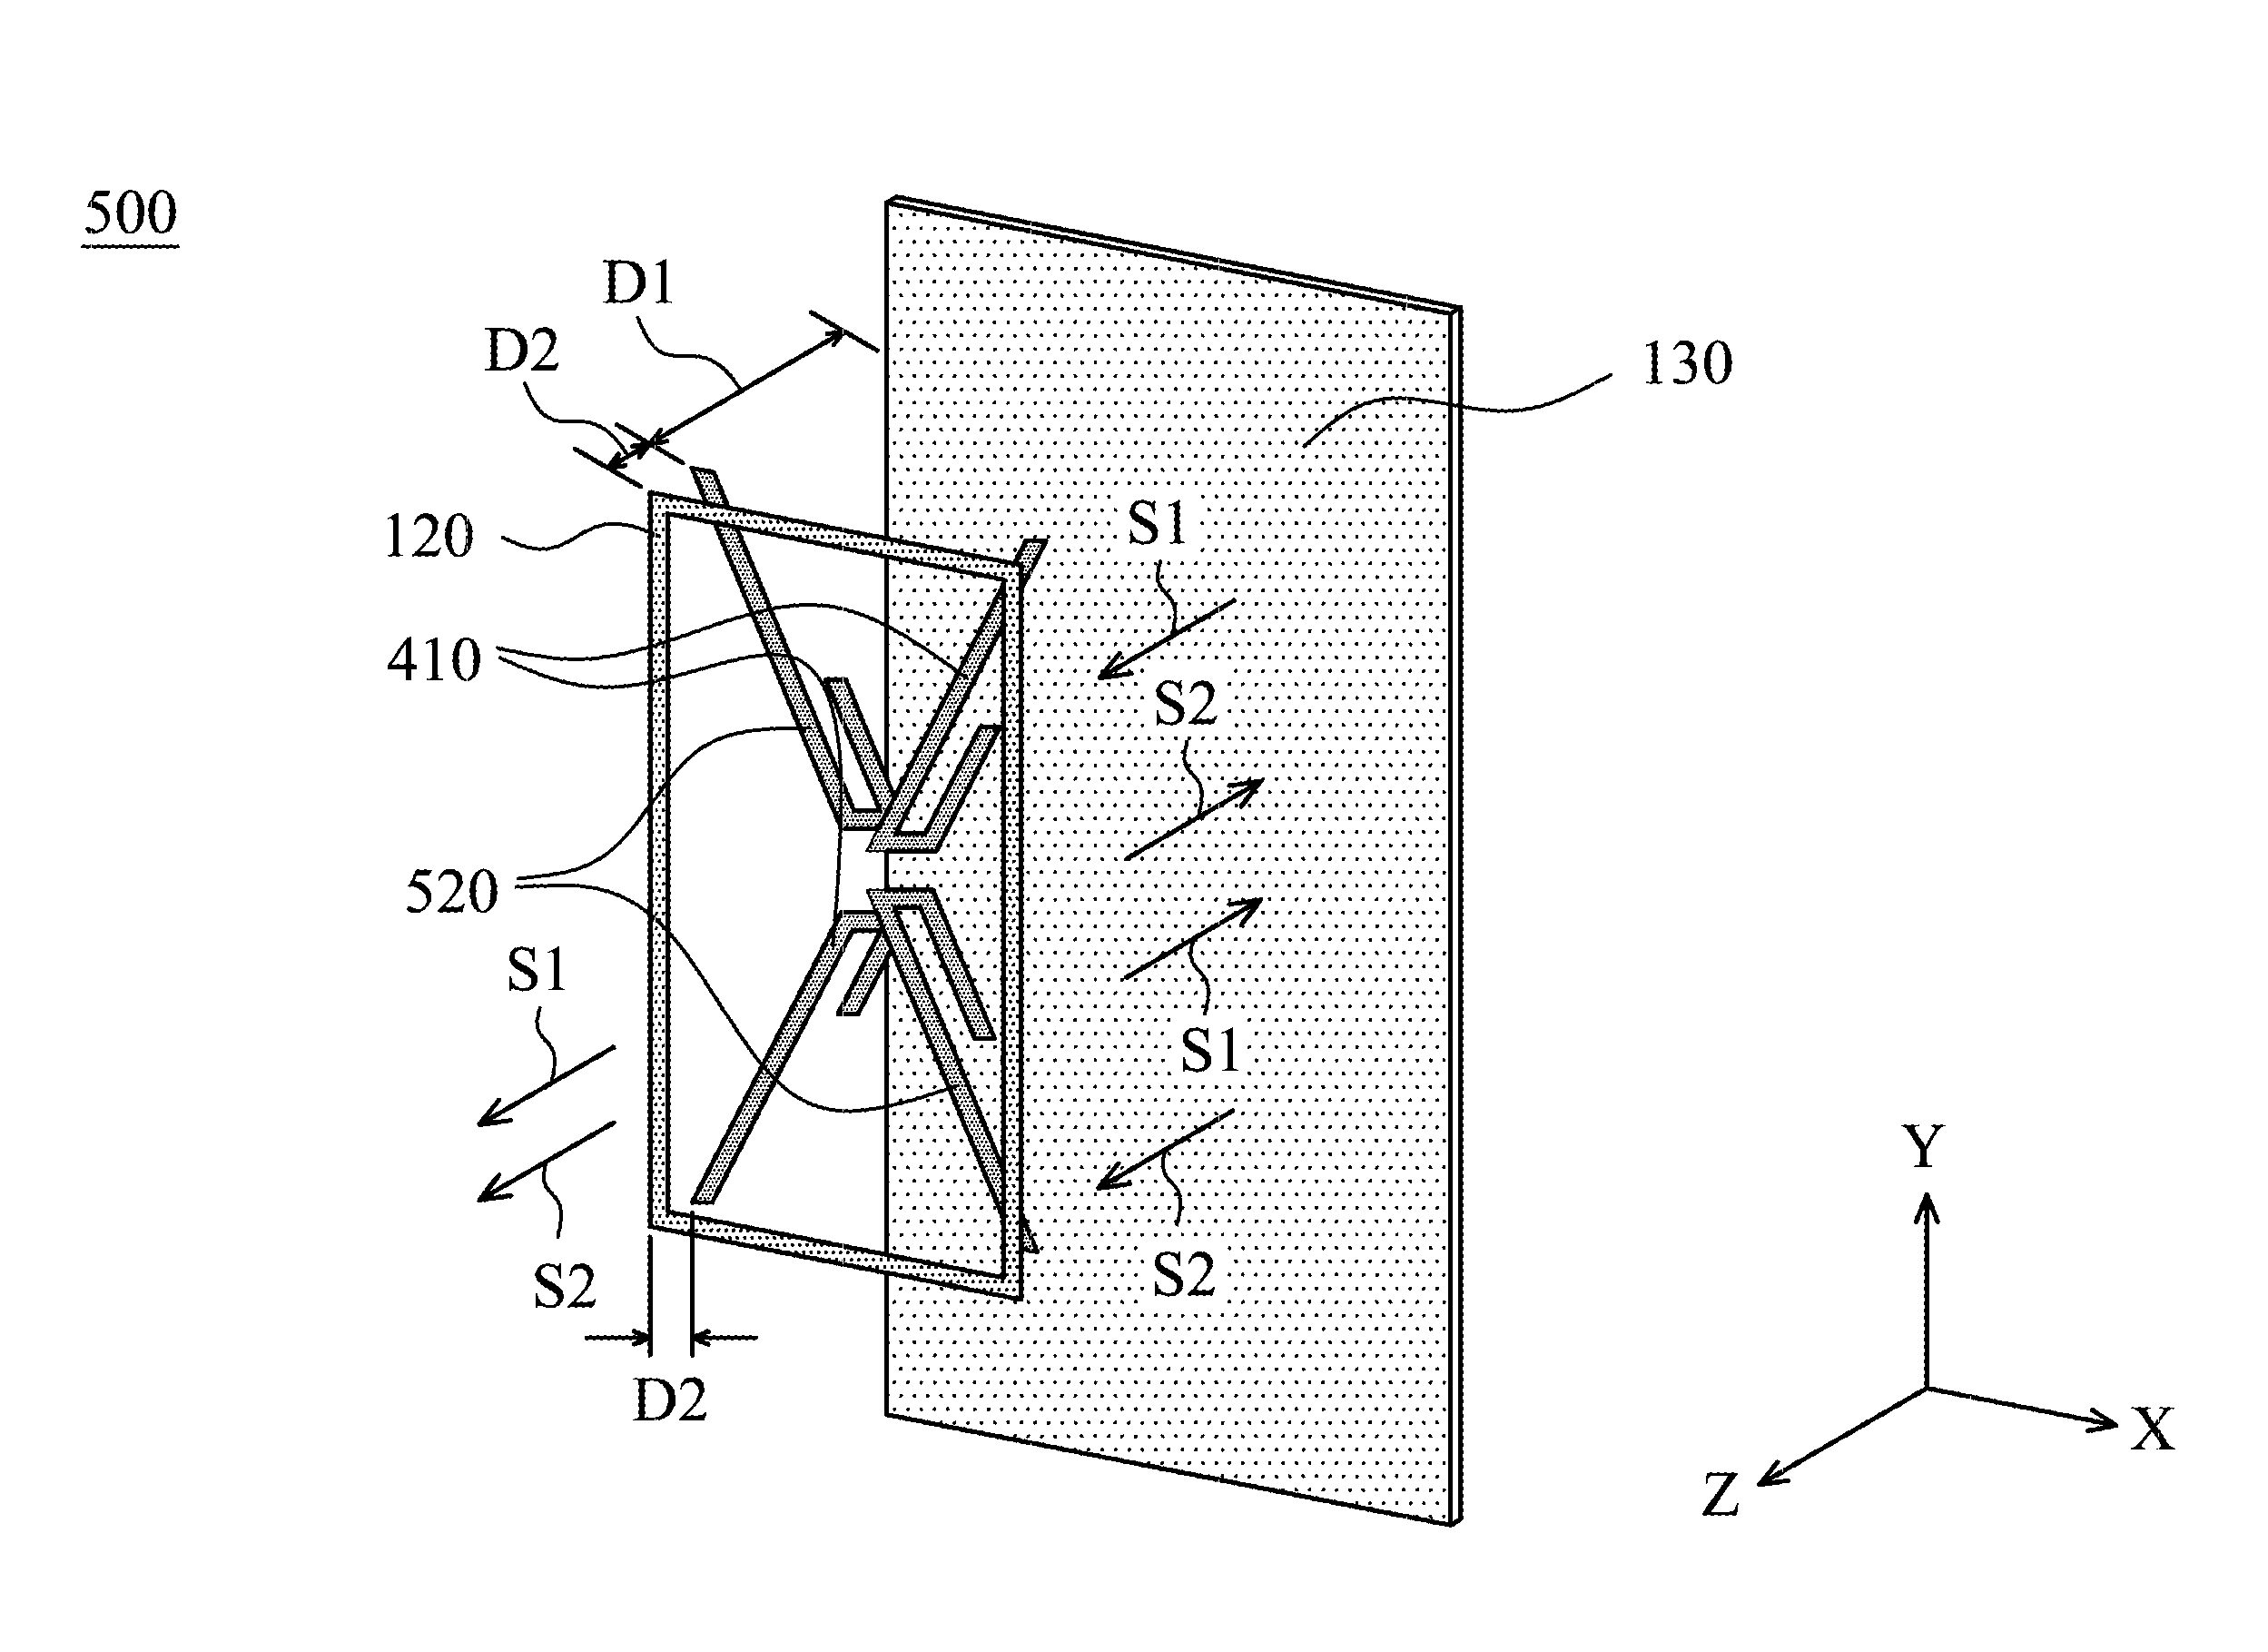 Directional antenna structure with dipole antenna element